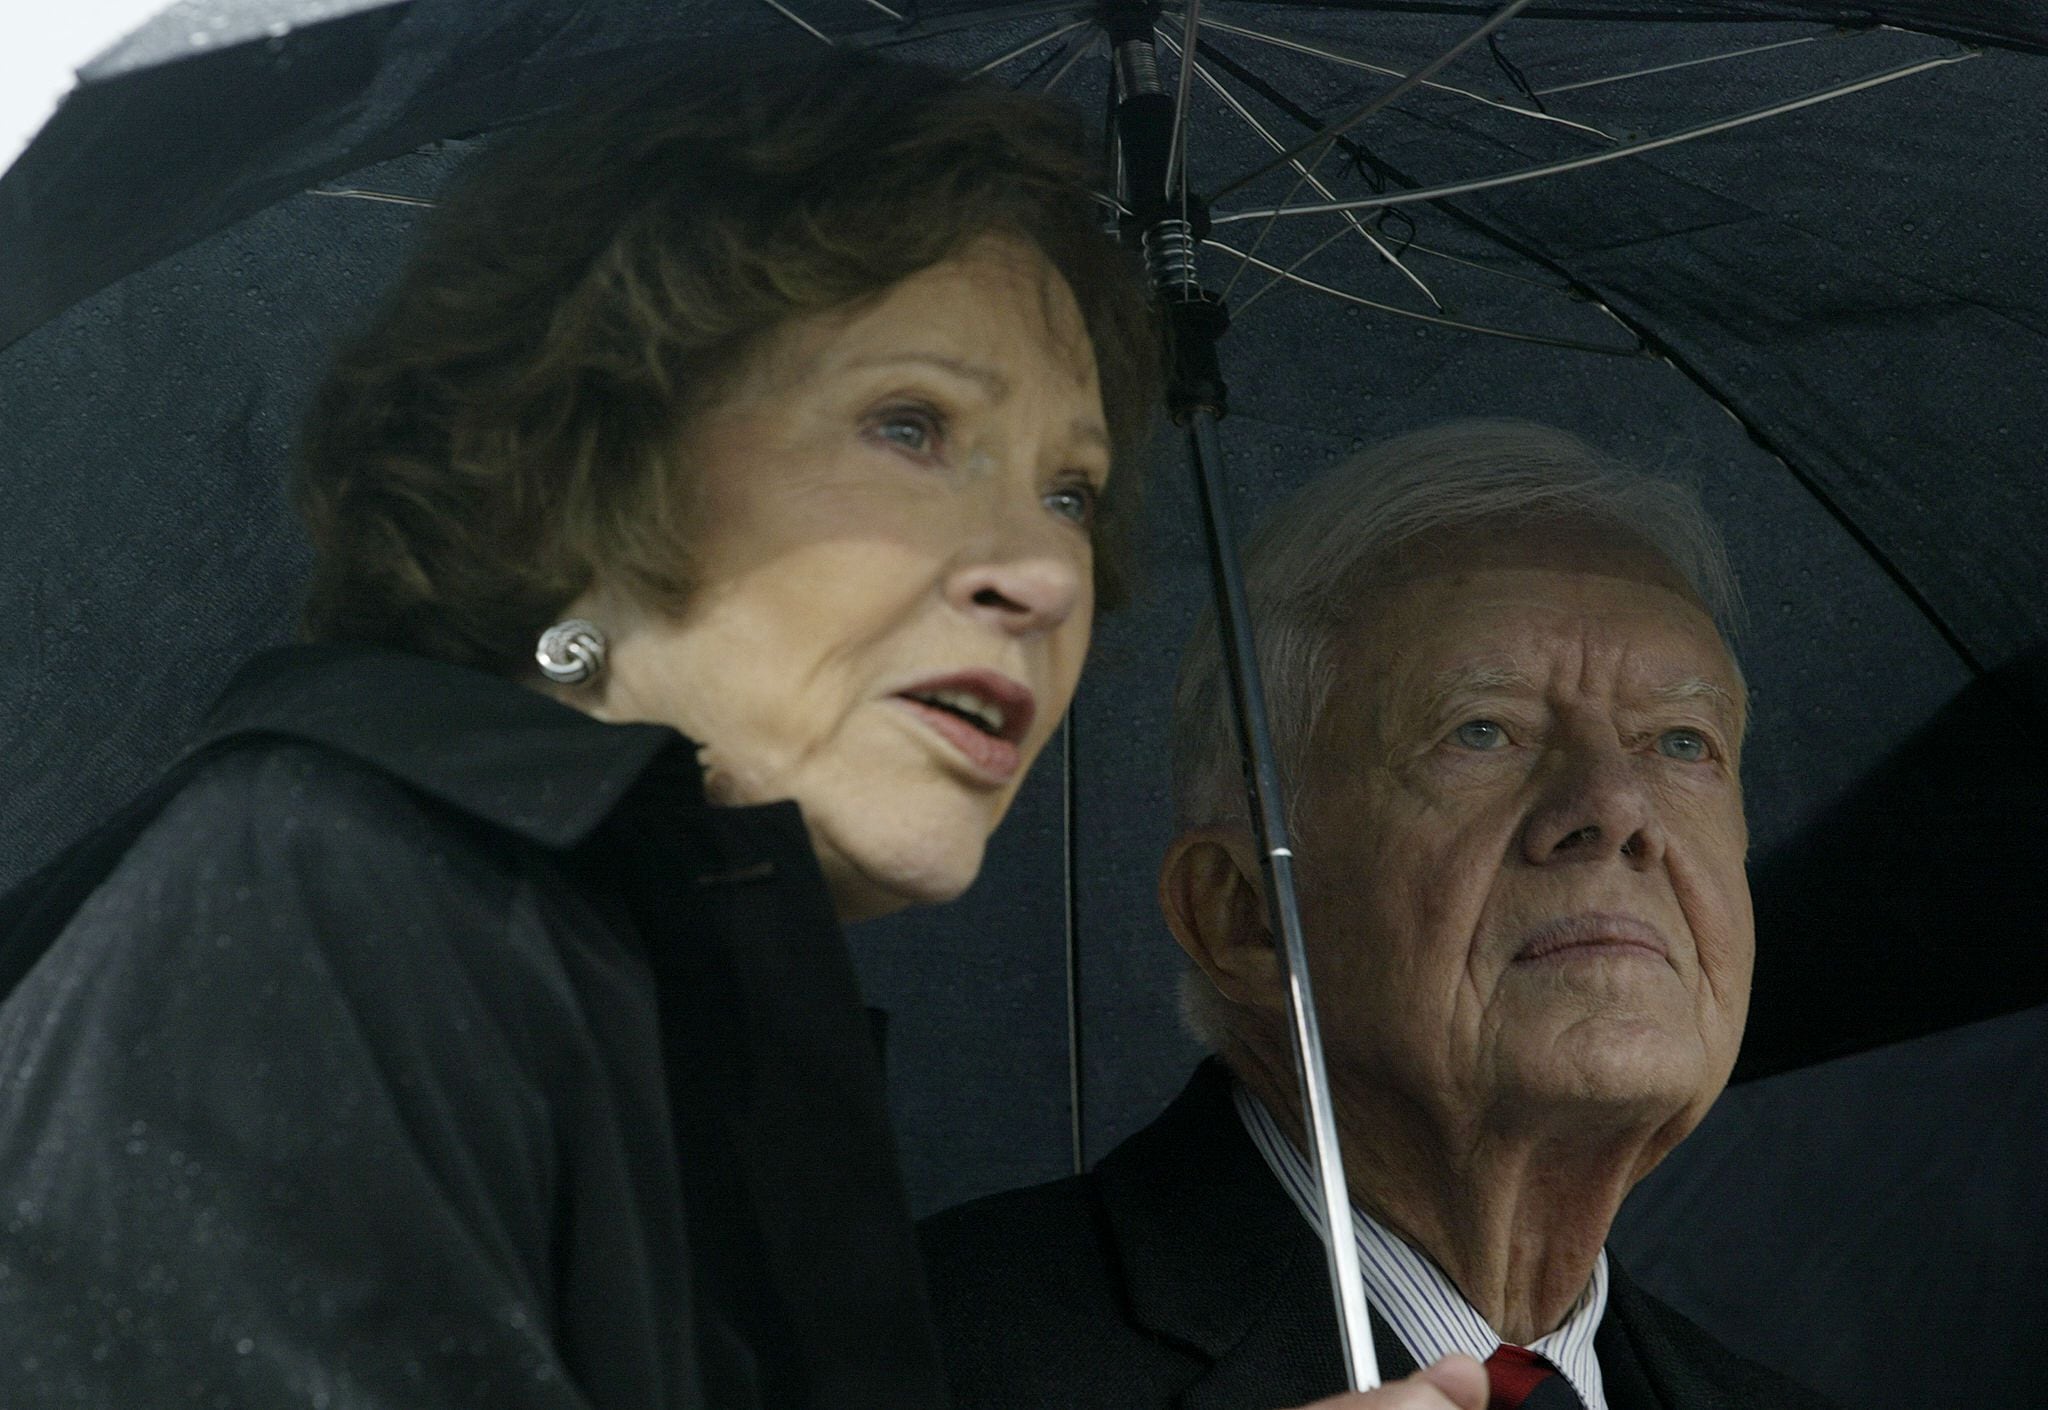 rosalynn carter: mourners pay tribute to wife of jimmy carter at memorial service